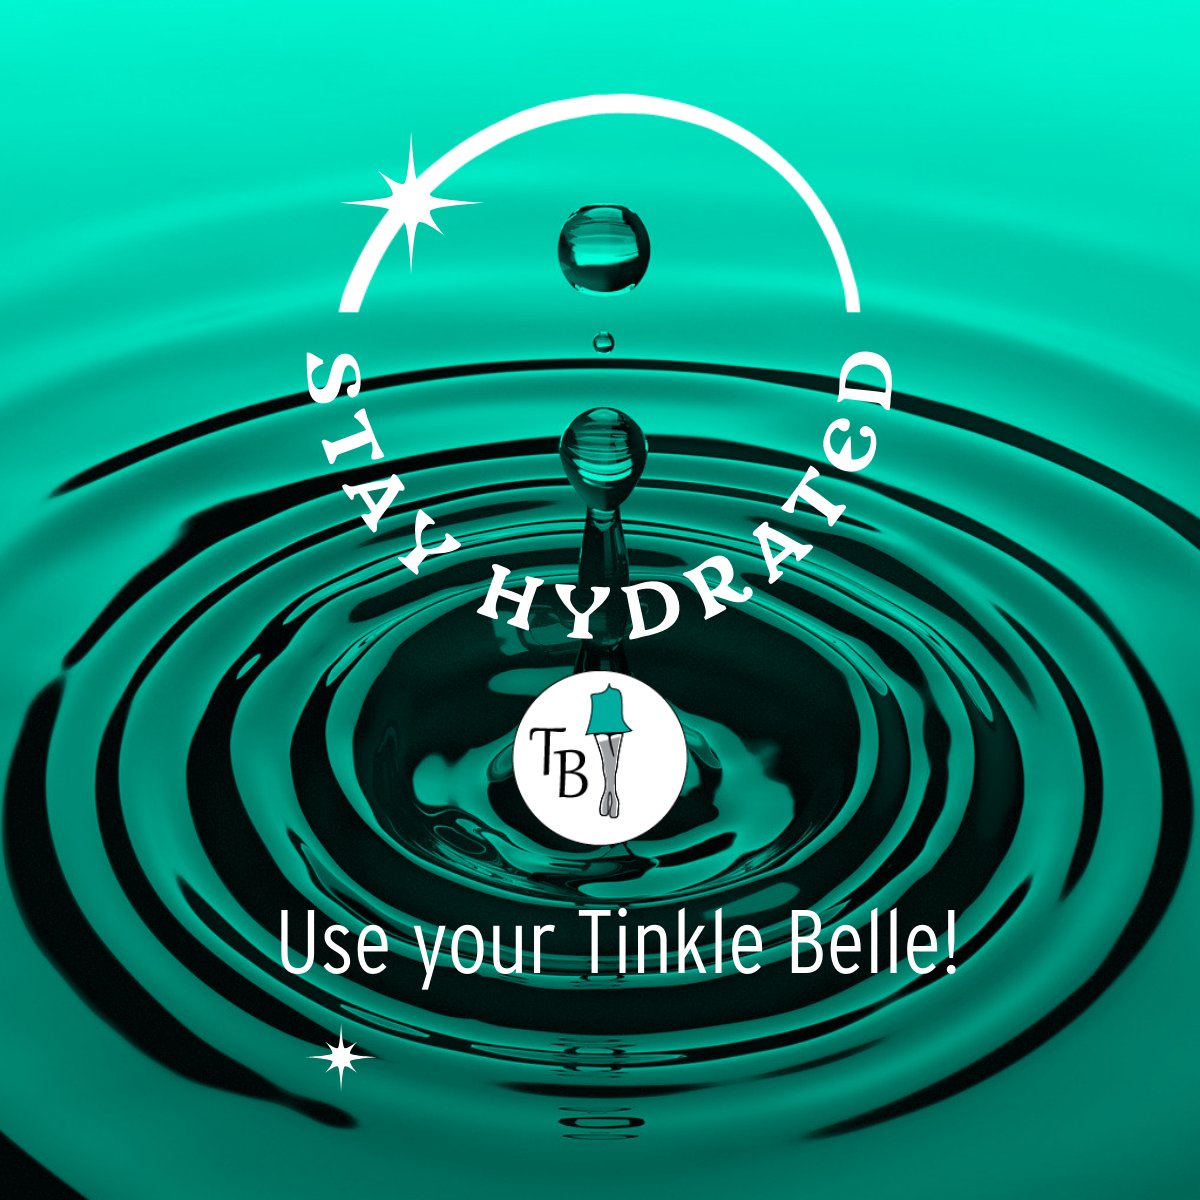 #StayHydrated and you can when you have #TheTinkleBelle #HydroHomie #PeeFreedom